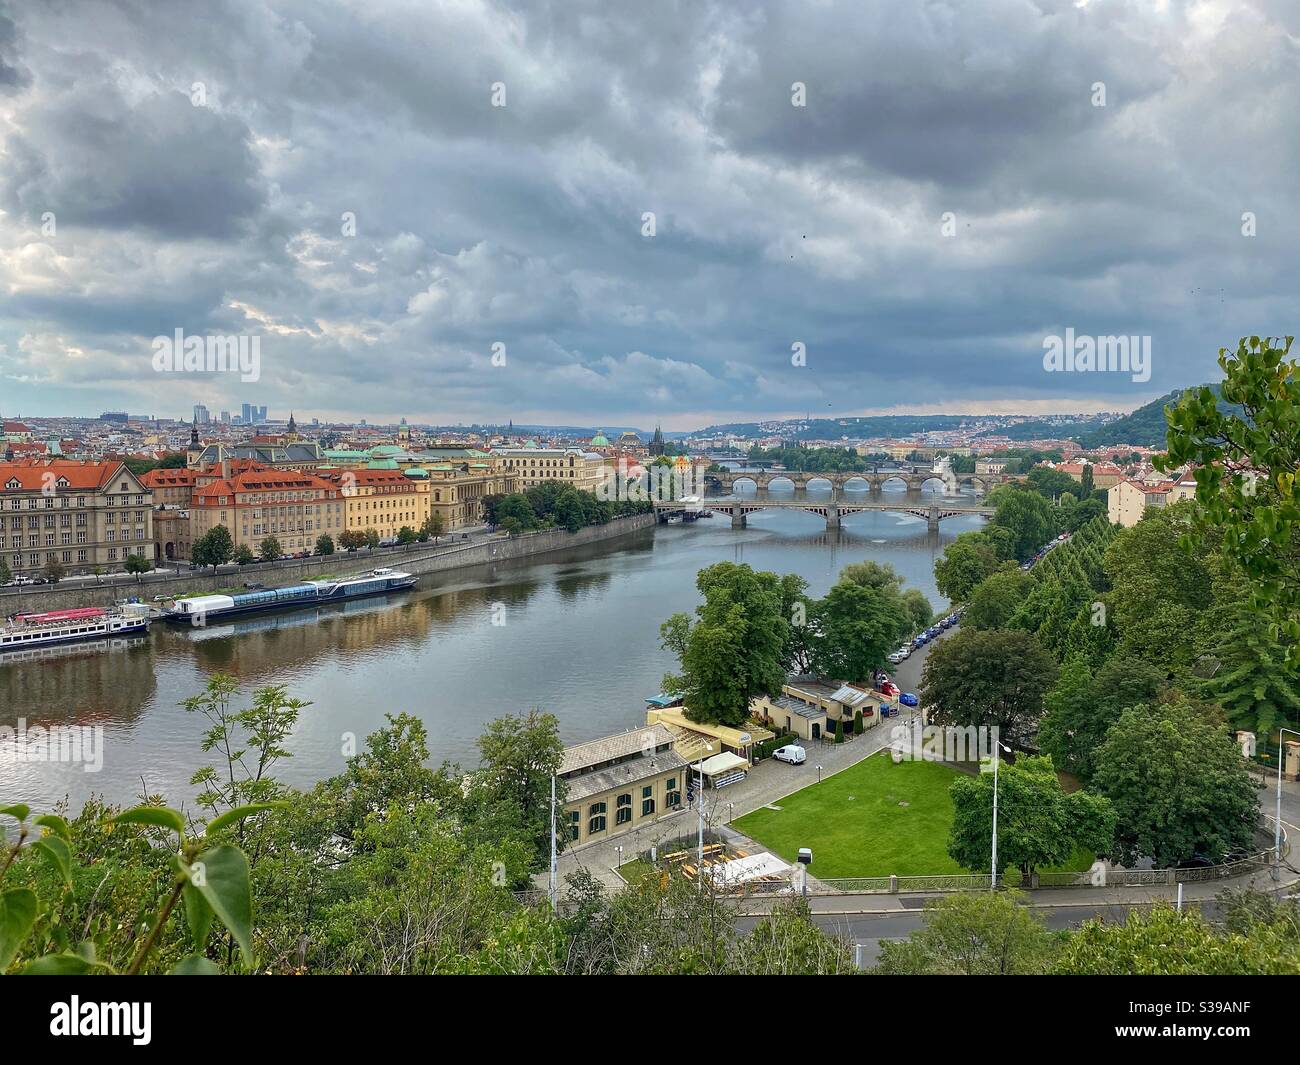 Scenic cloudy view at Prague old town and river Moldau with bridges. Stock Photo